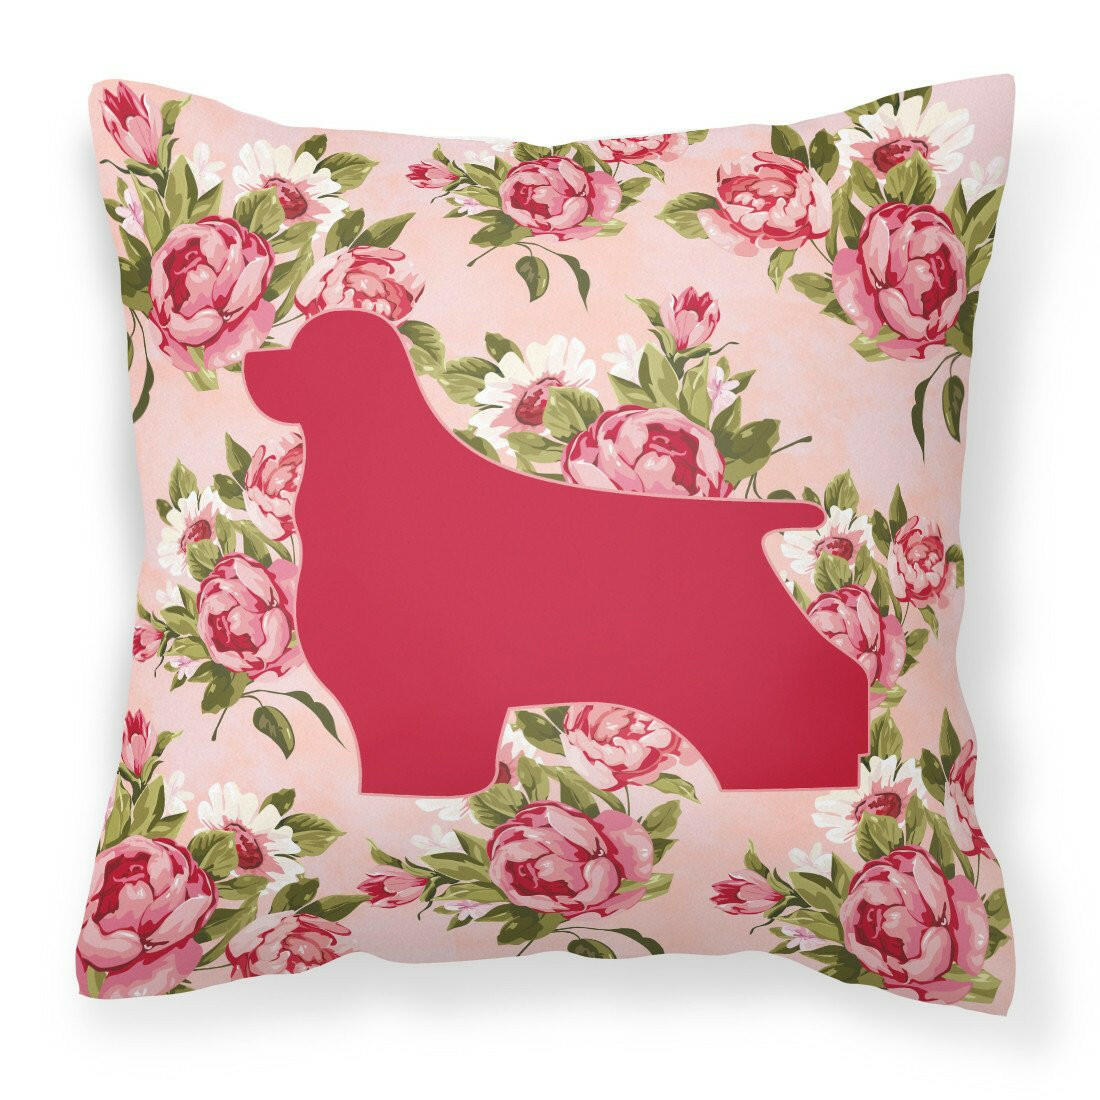 Cocker Spaniel Shabby Chic Pink Roses  Fabric Decorative Pillow BB1075-RS-PK-PW1414 - the-store.com